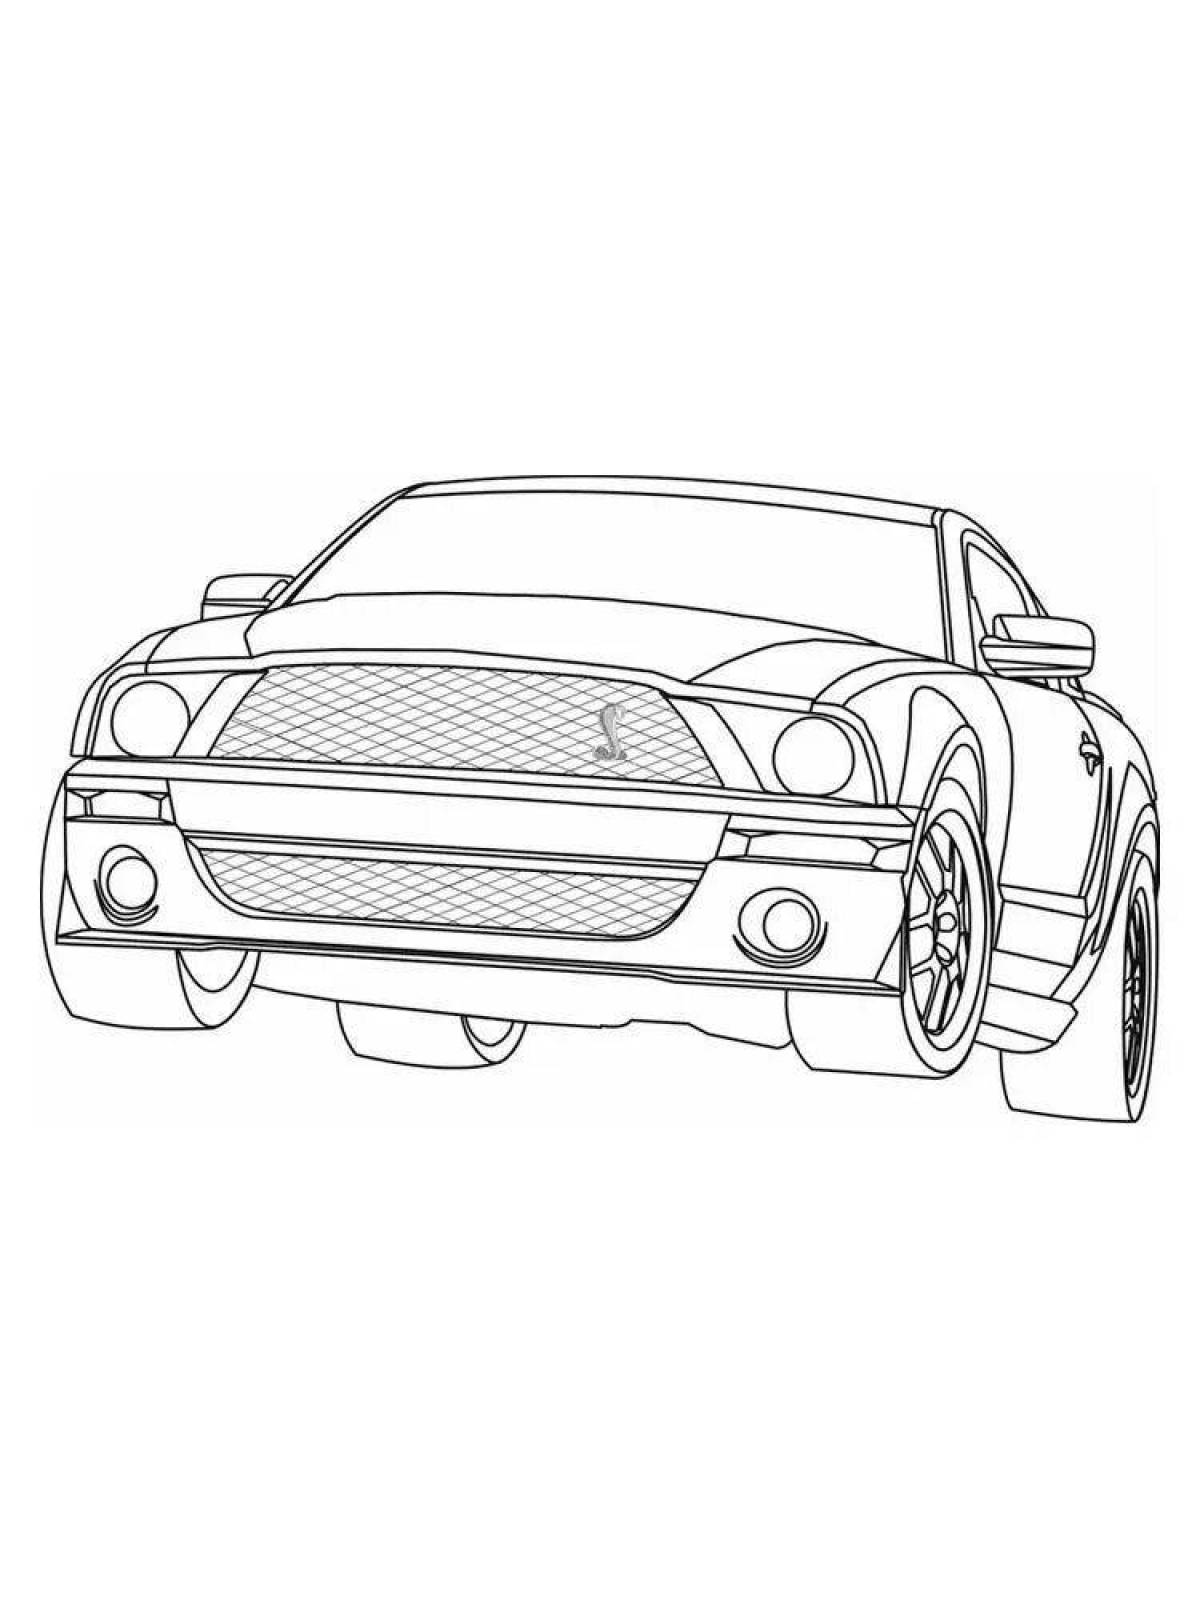 Coloring book gorgeous ford mustang